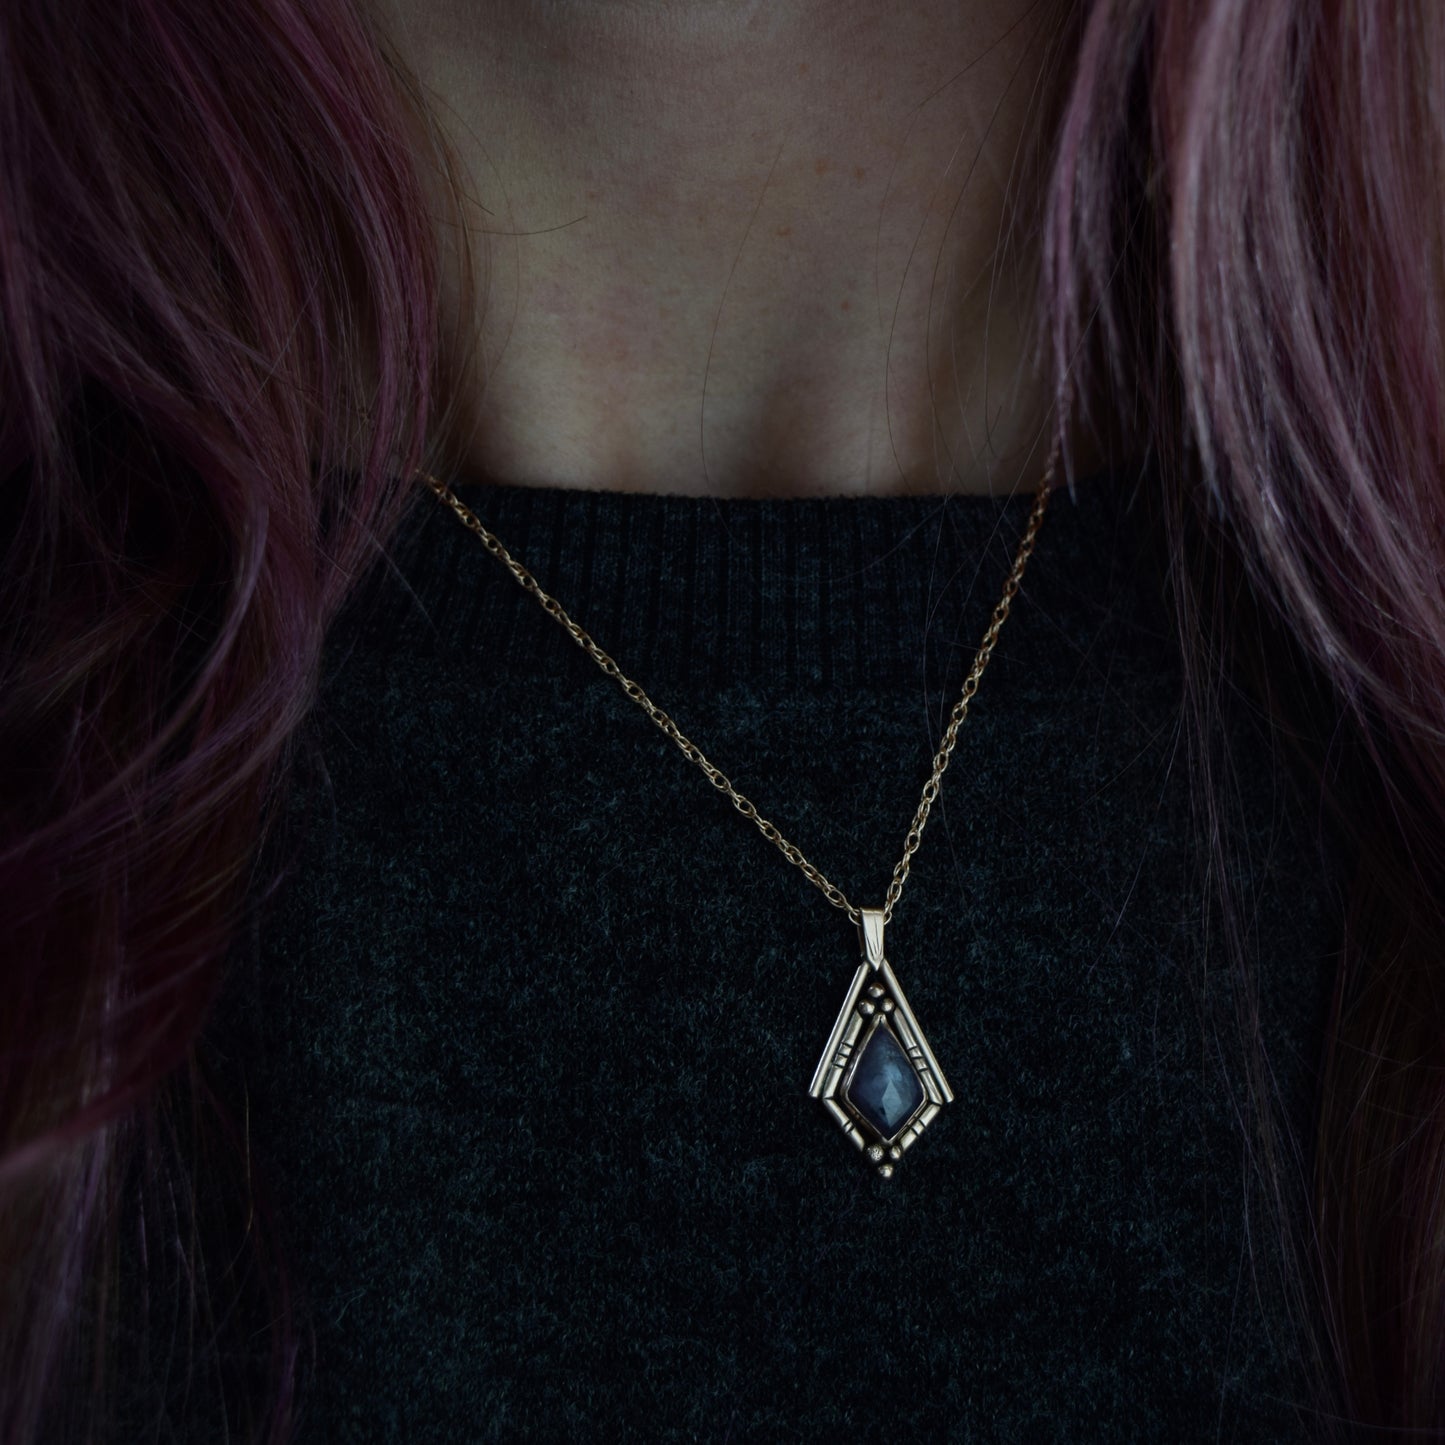 North Star Necklace with 14k Solid Rose Gold, Rose Gold Fill Chain, and Rose Cut Lavender Sapphire